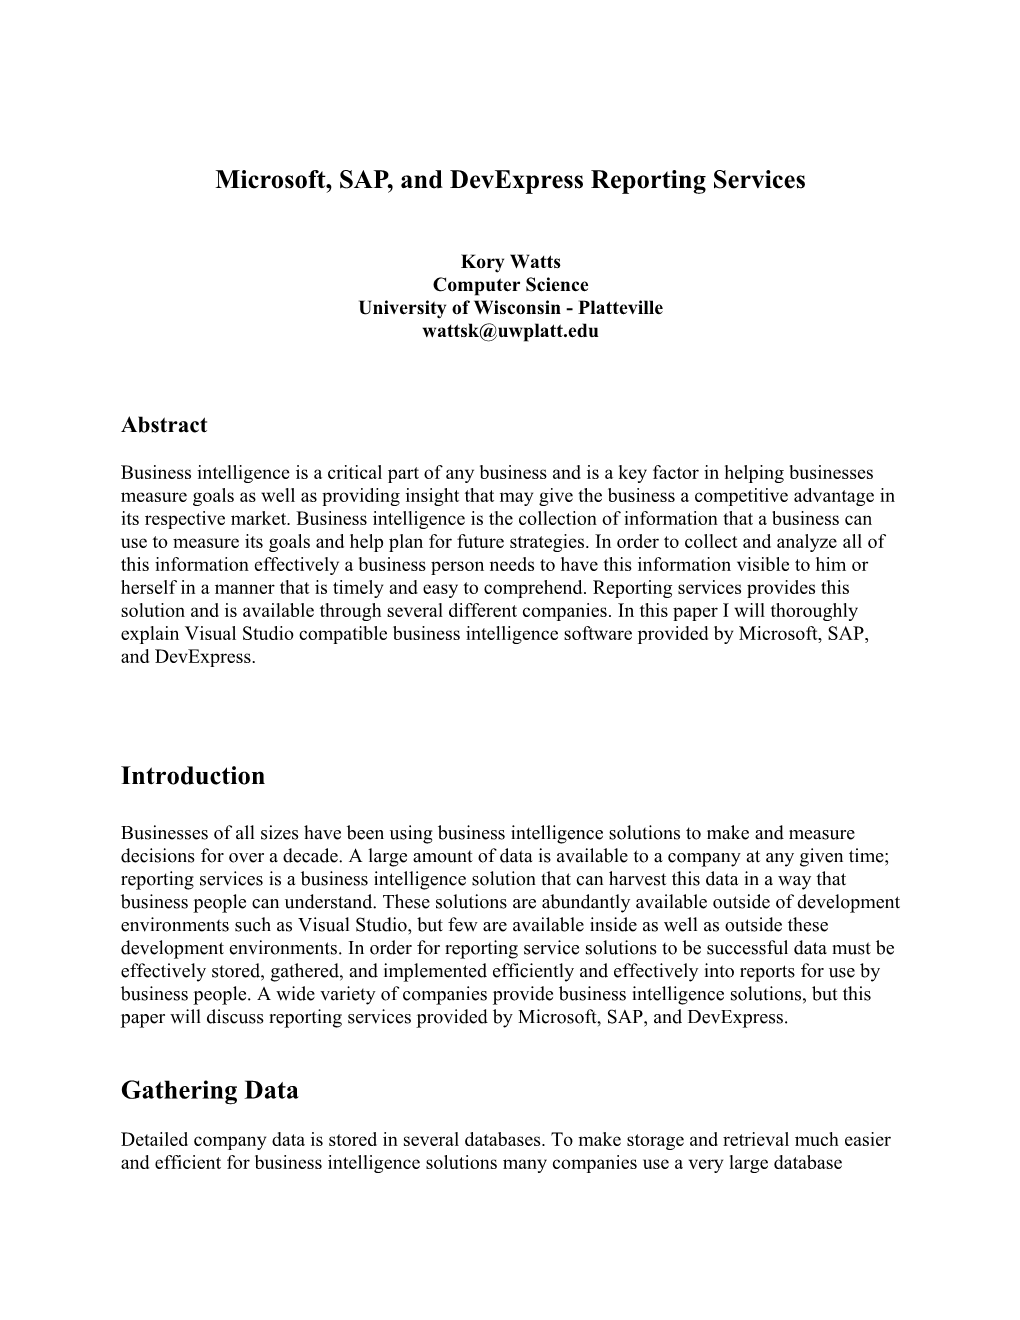 Microsoft, SAP, and Devexpress Reporting Services